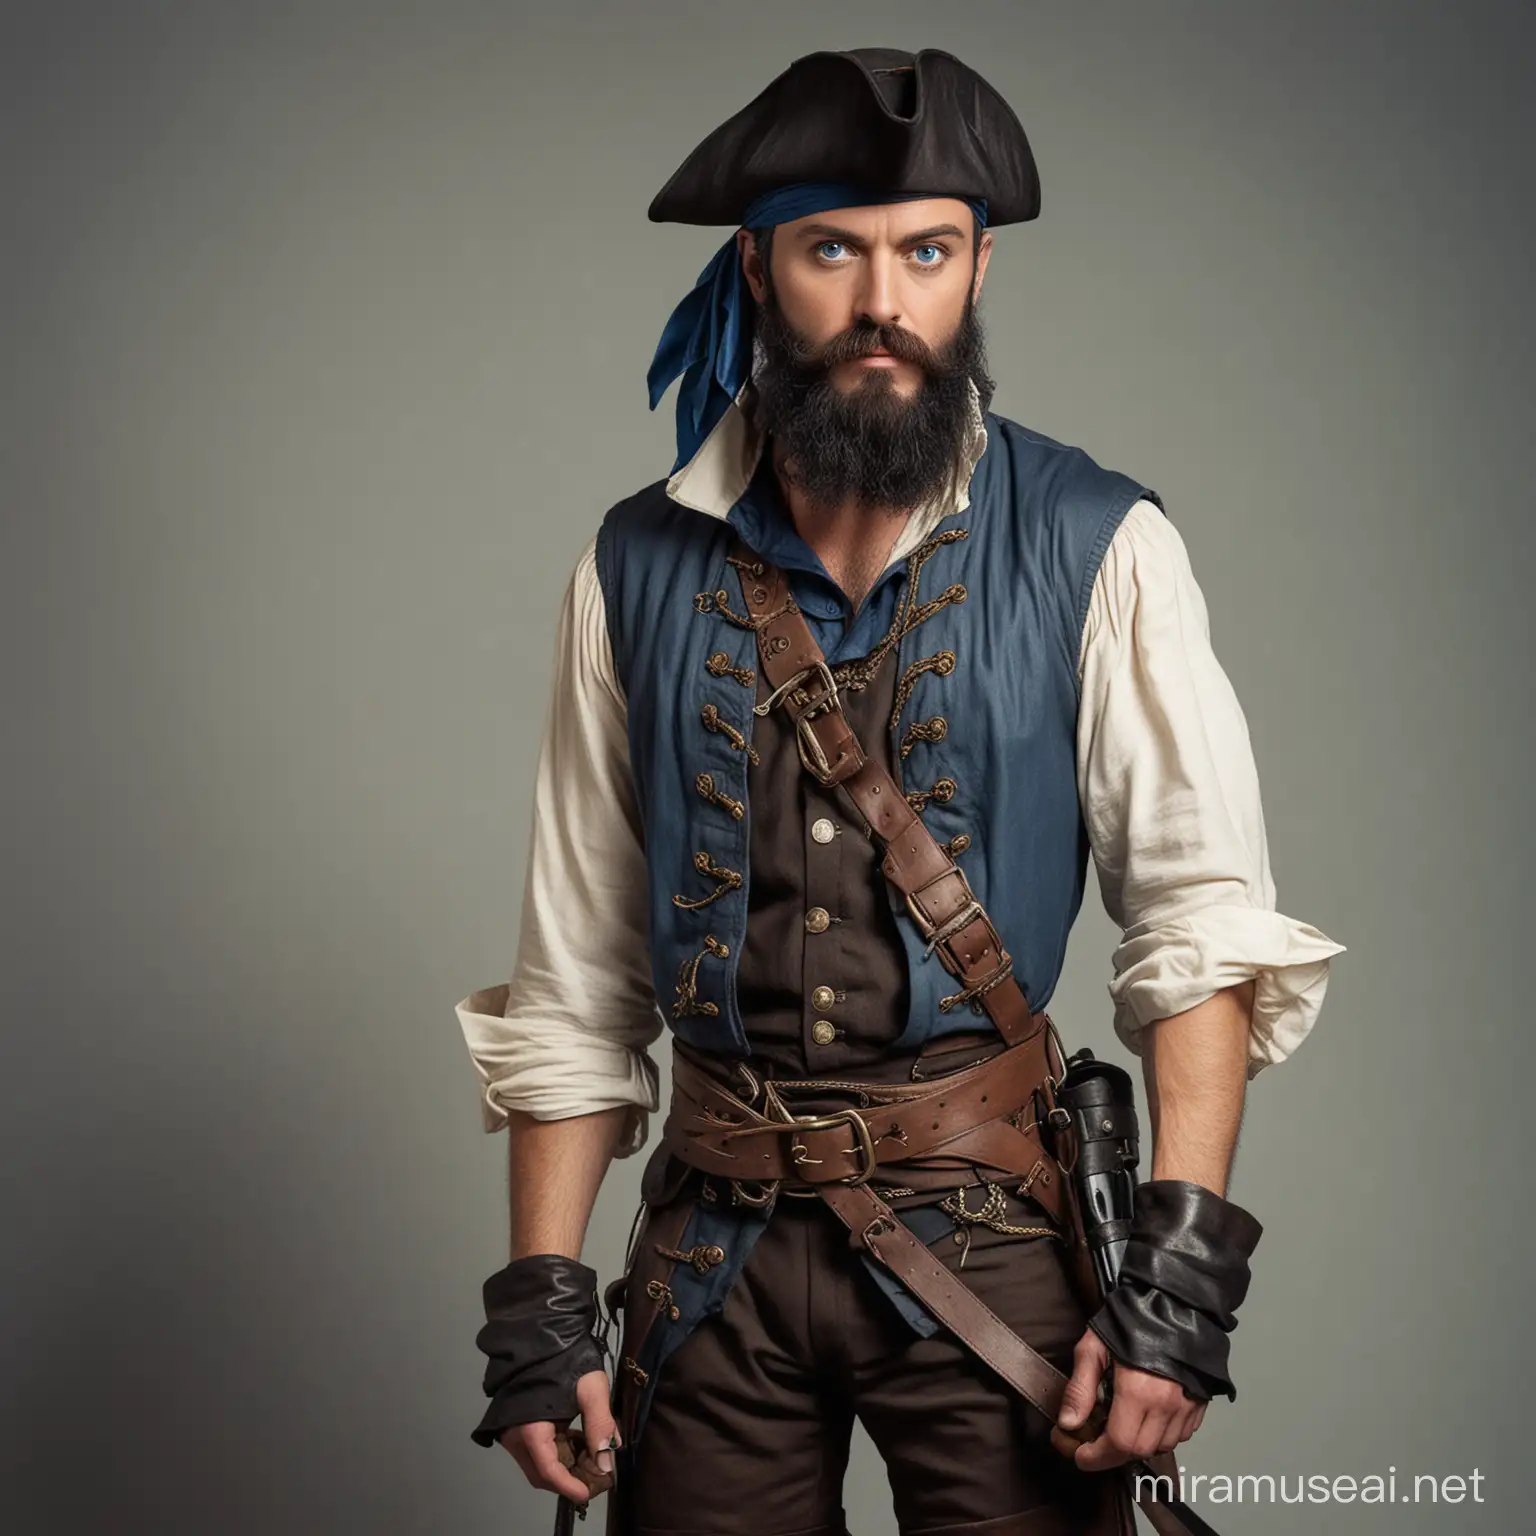 Tall BlueEyed Pirate with Long Black Beard and Wooden Leg